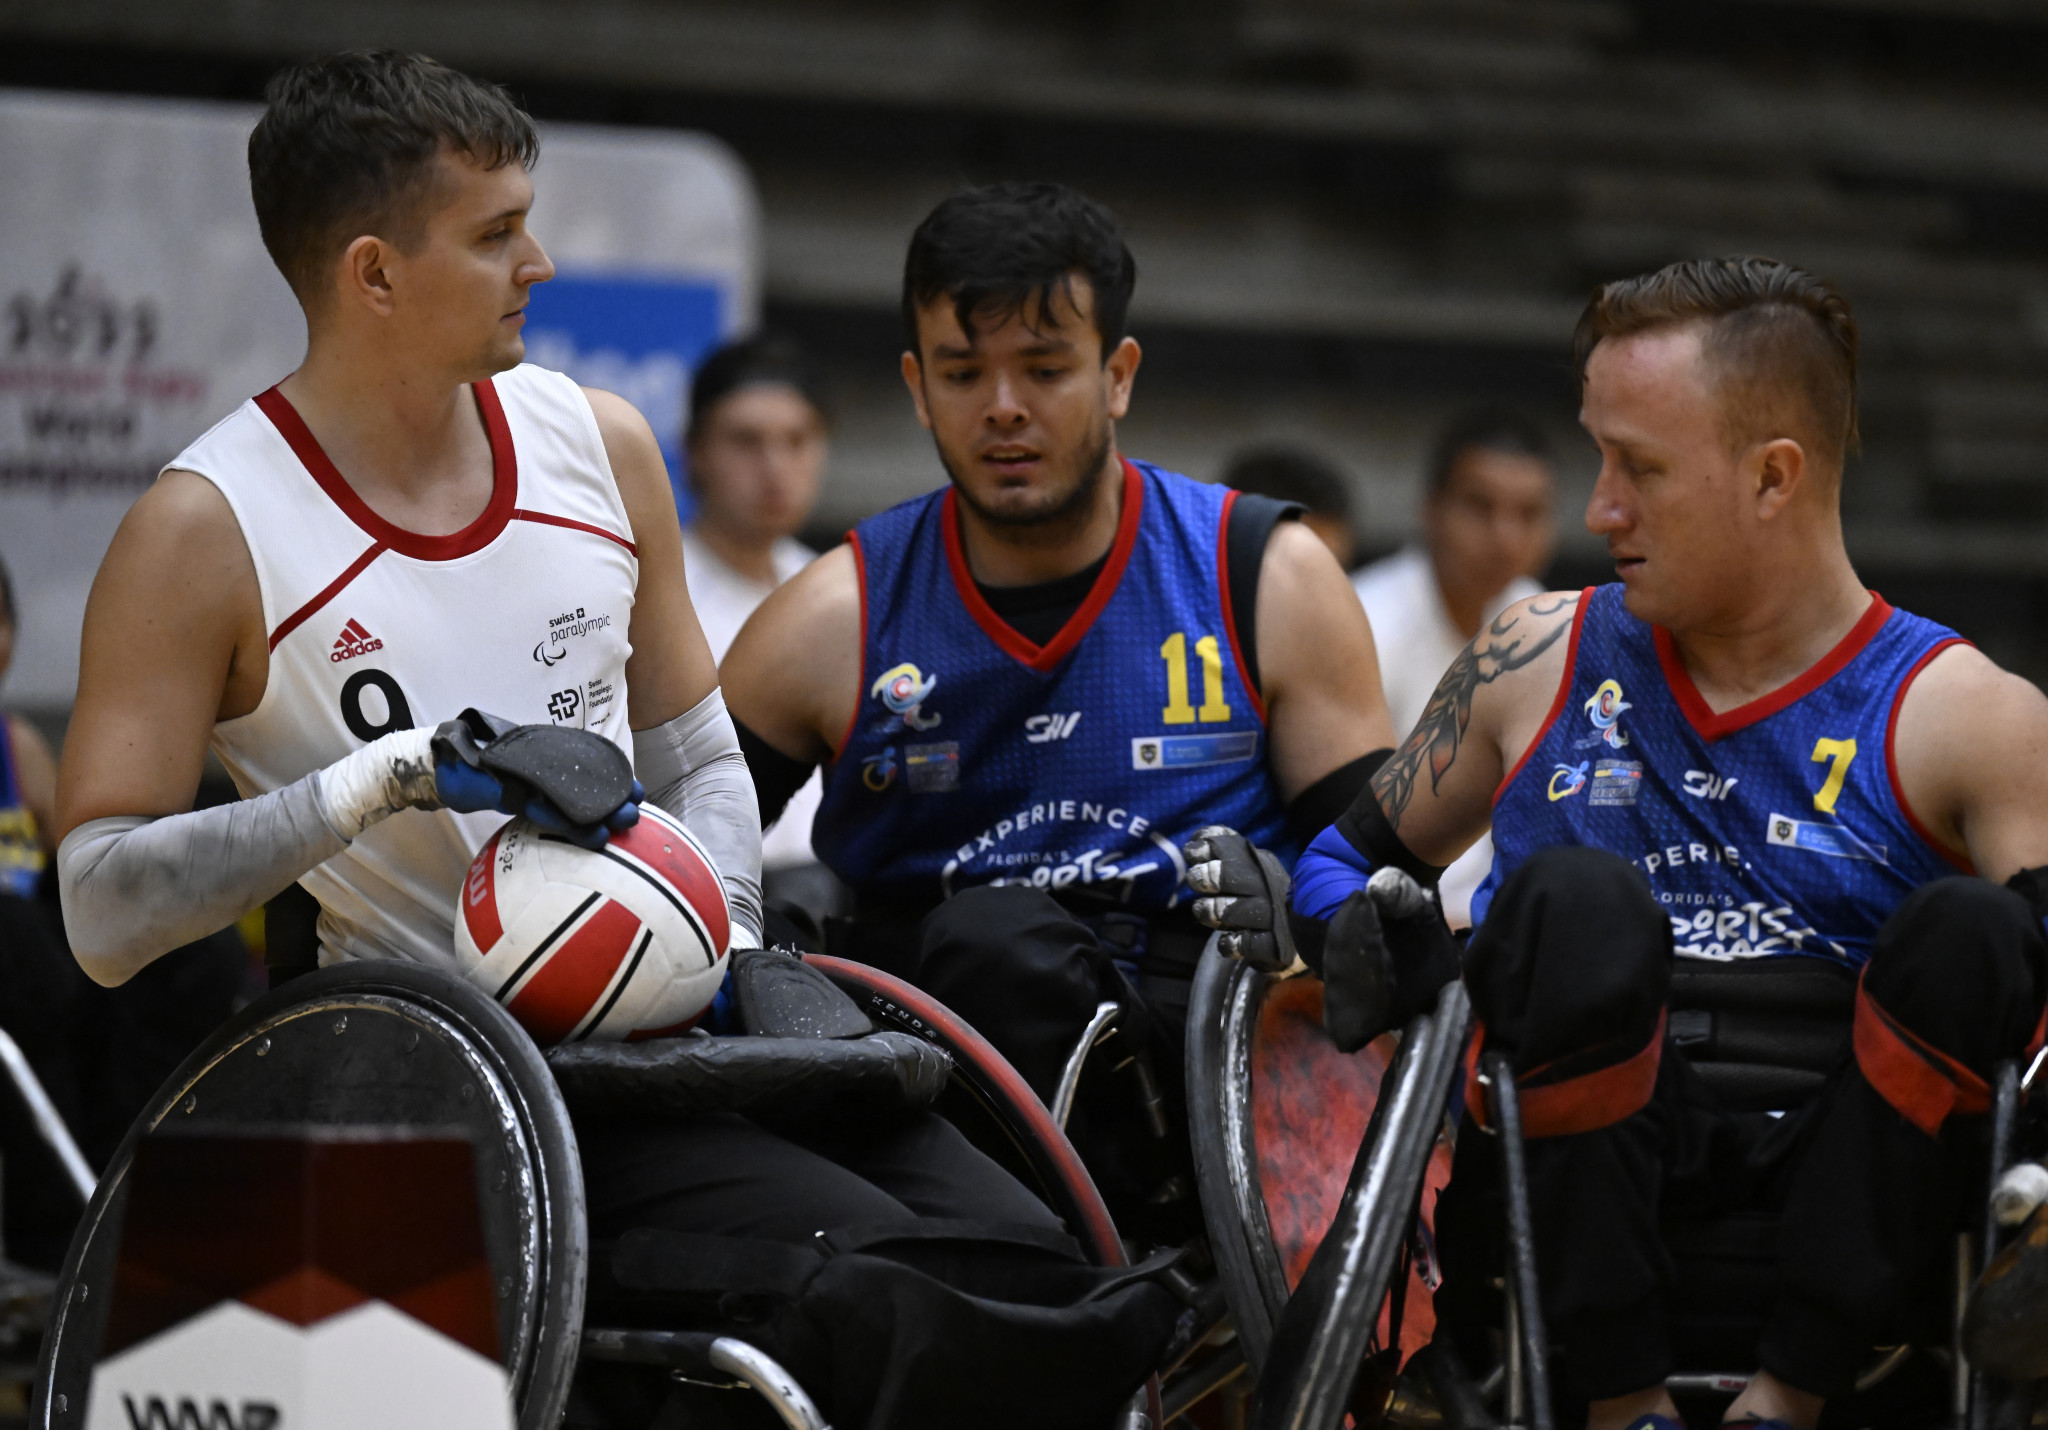 Colombia condemned Switzerland to a sixth tournament defeat in a placement fixture ©Lars Møller/Parasport Denmark